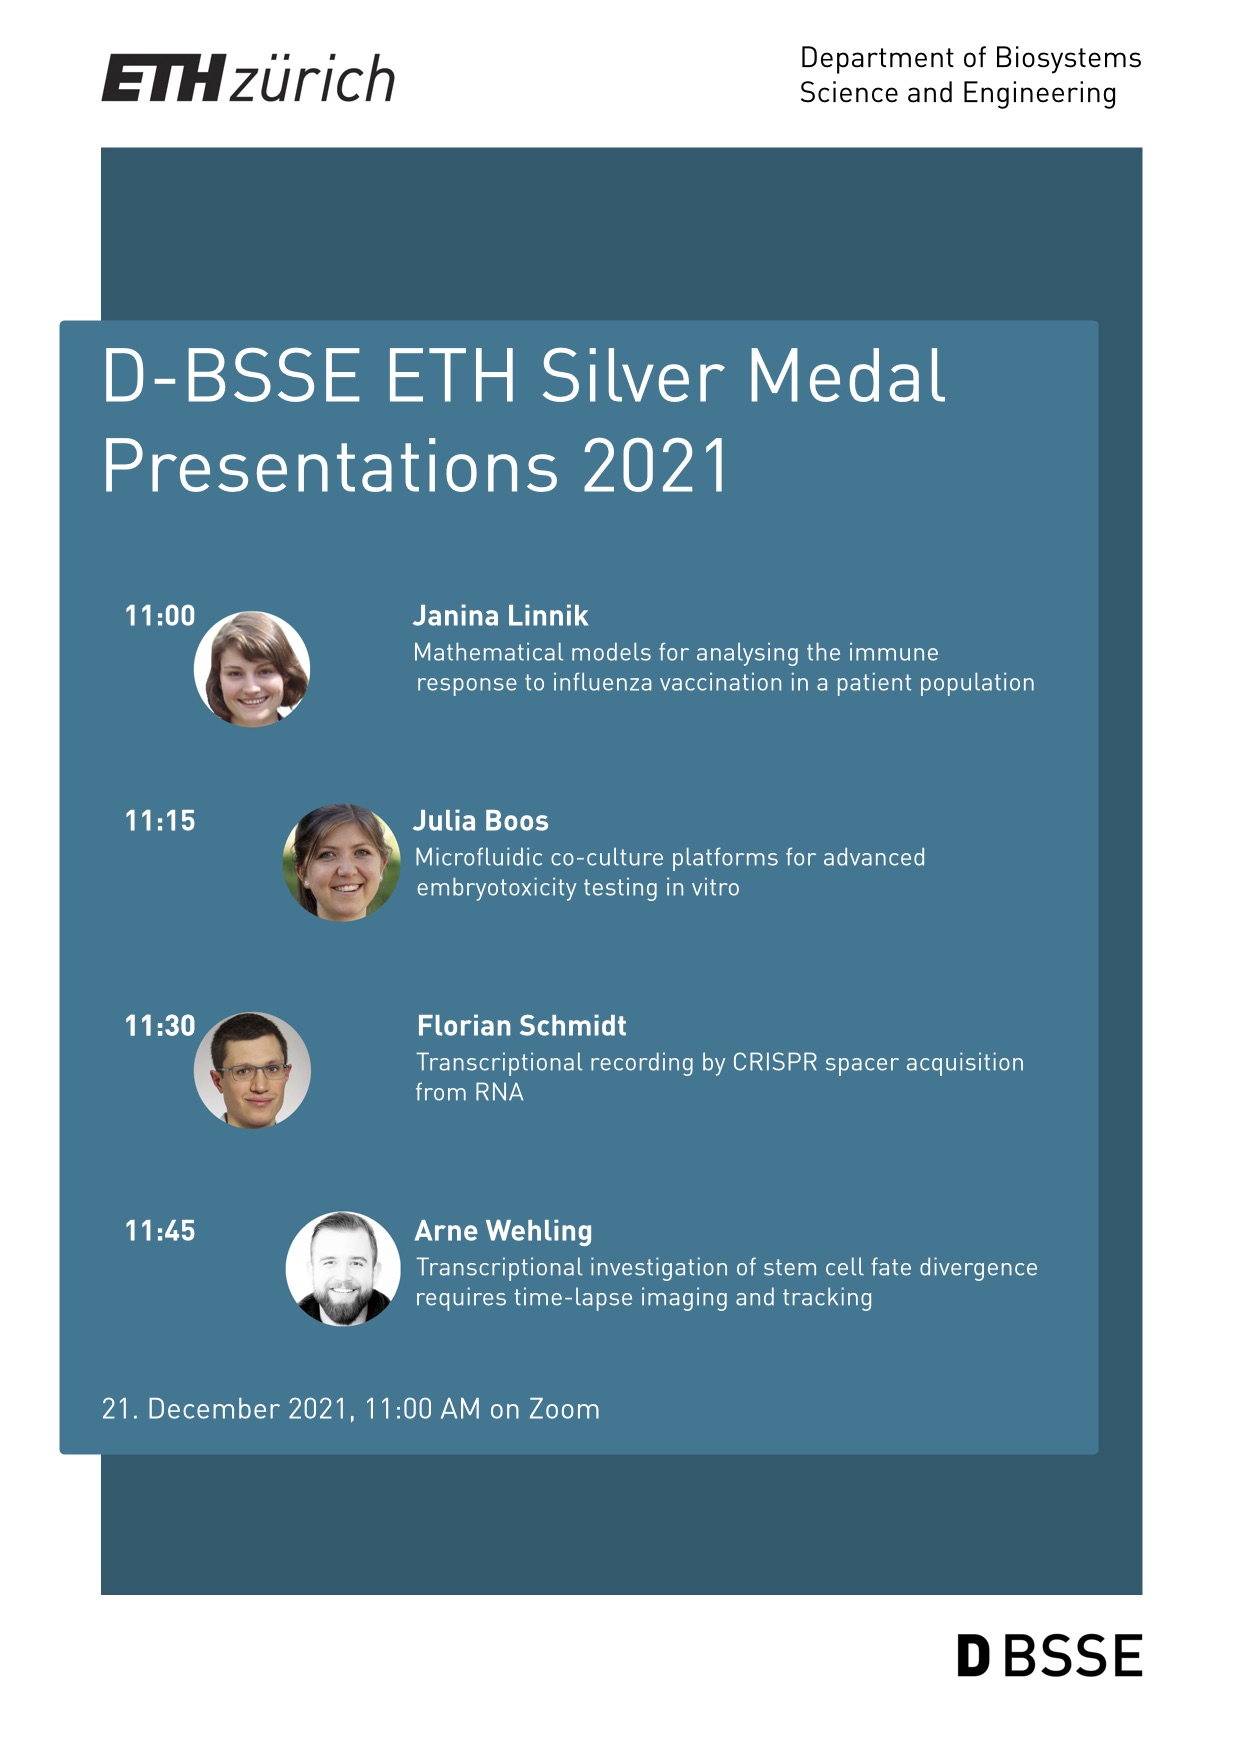 Enlarged view: ETH-Silver-Medal presentations at D-BSSE, 2022